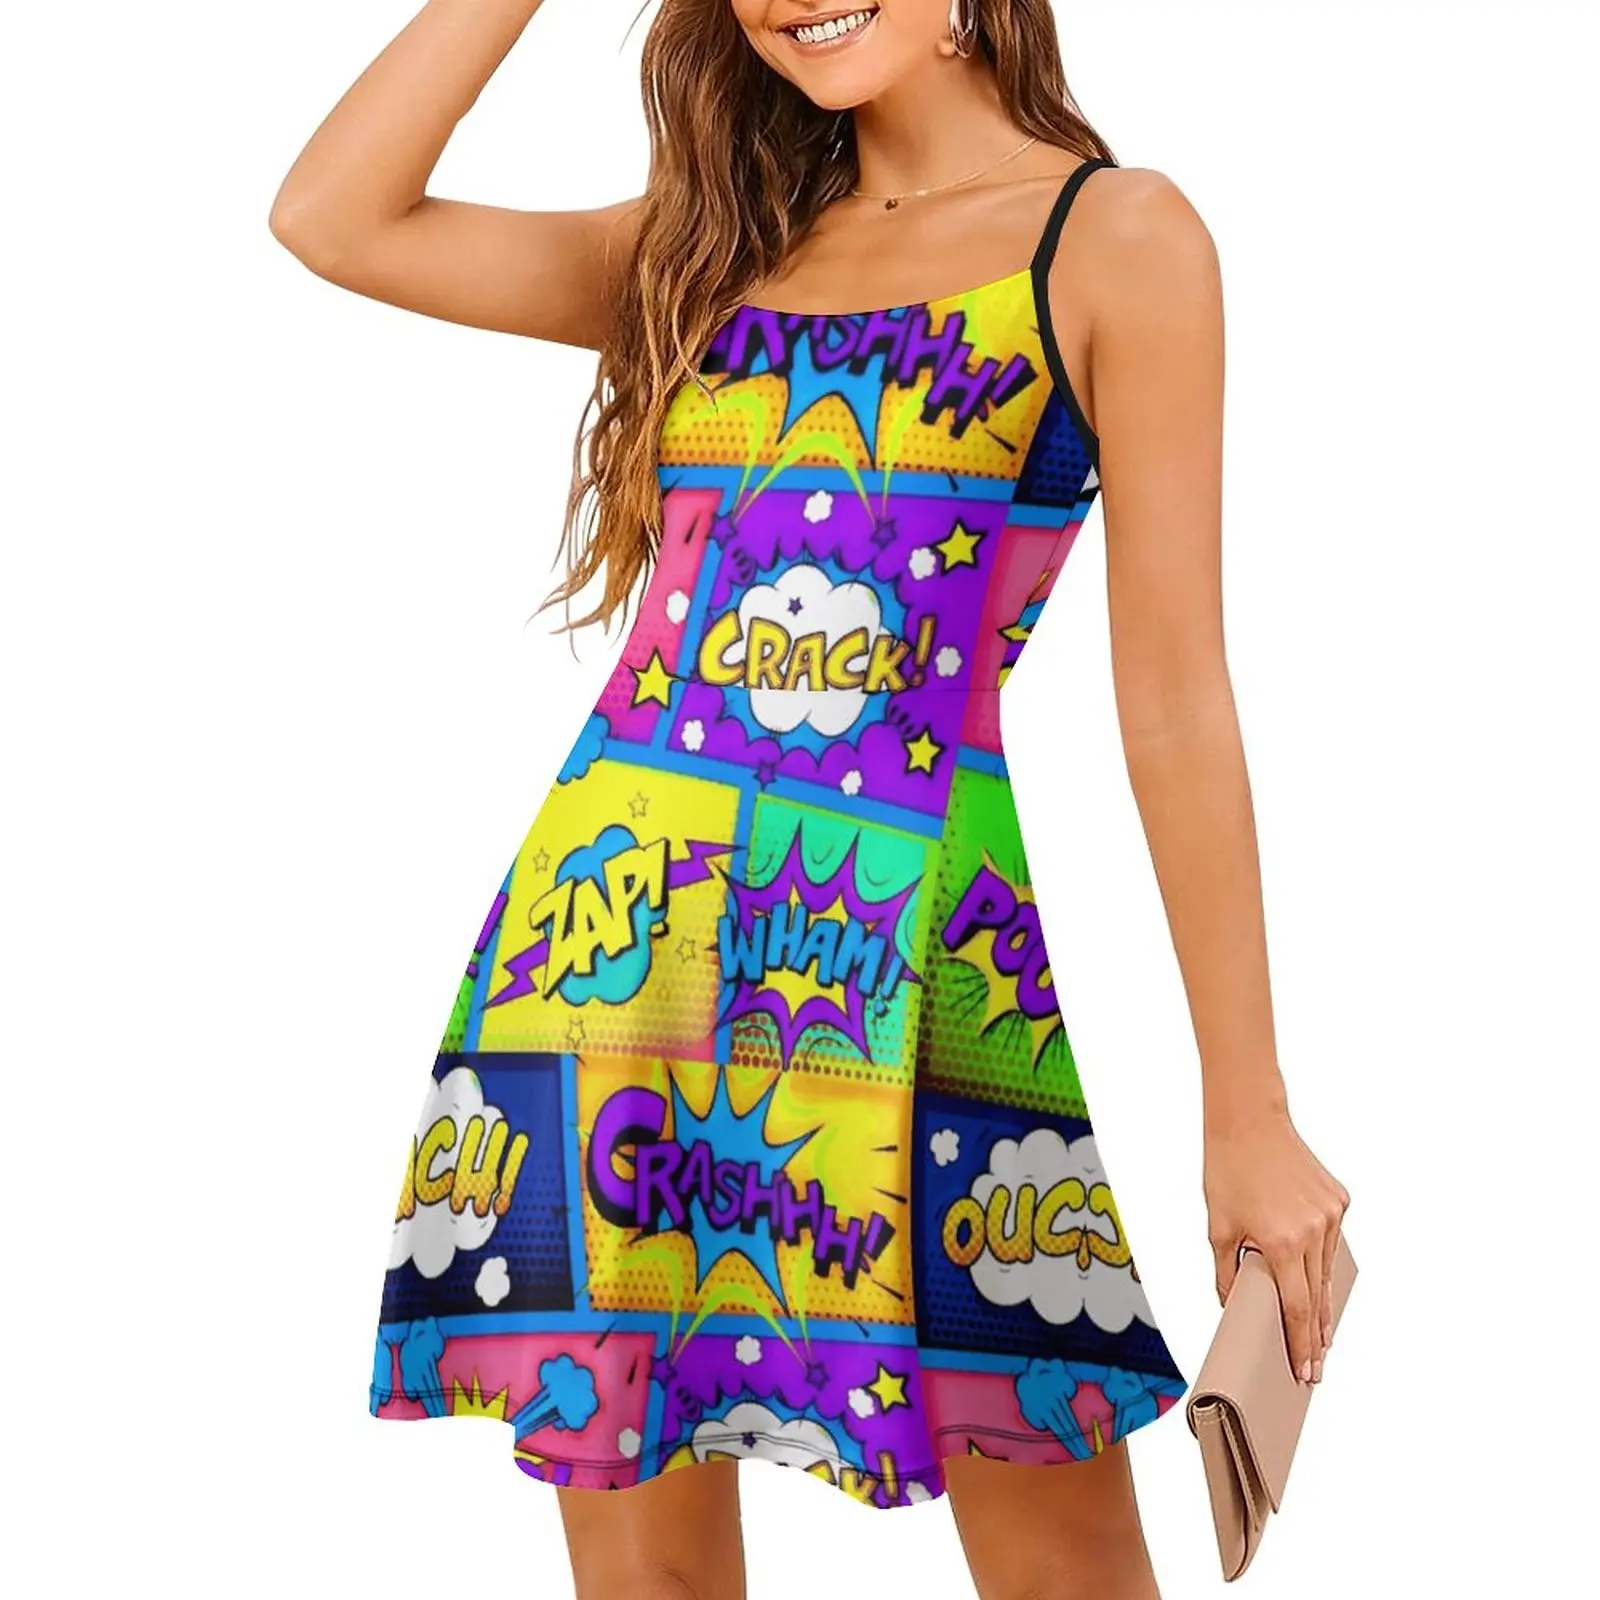 

Exotic Woman's Clothing The Dress Panels Crazy Colorful And Bright Comic Book Panels Arts 3 Women's Sling Dress Graphic Vacatio